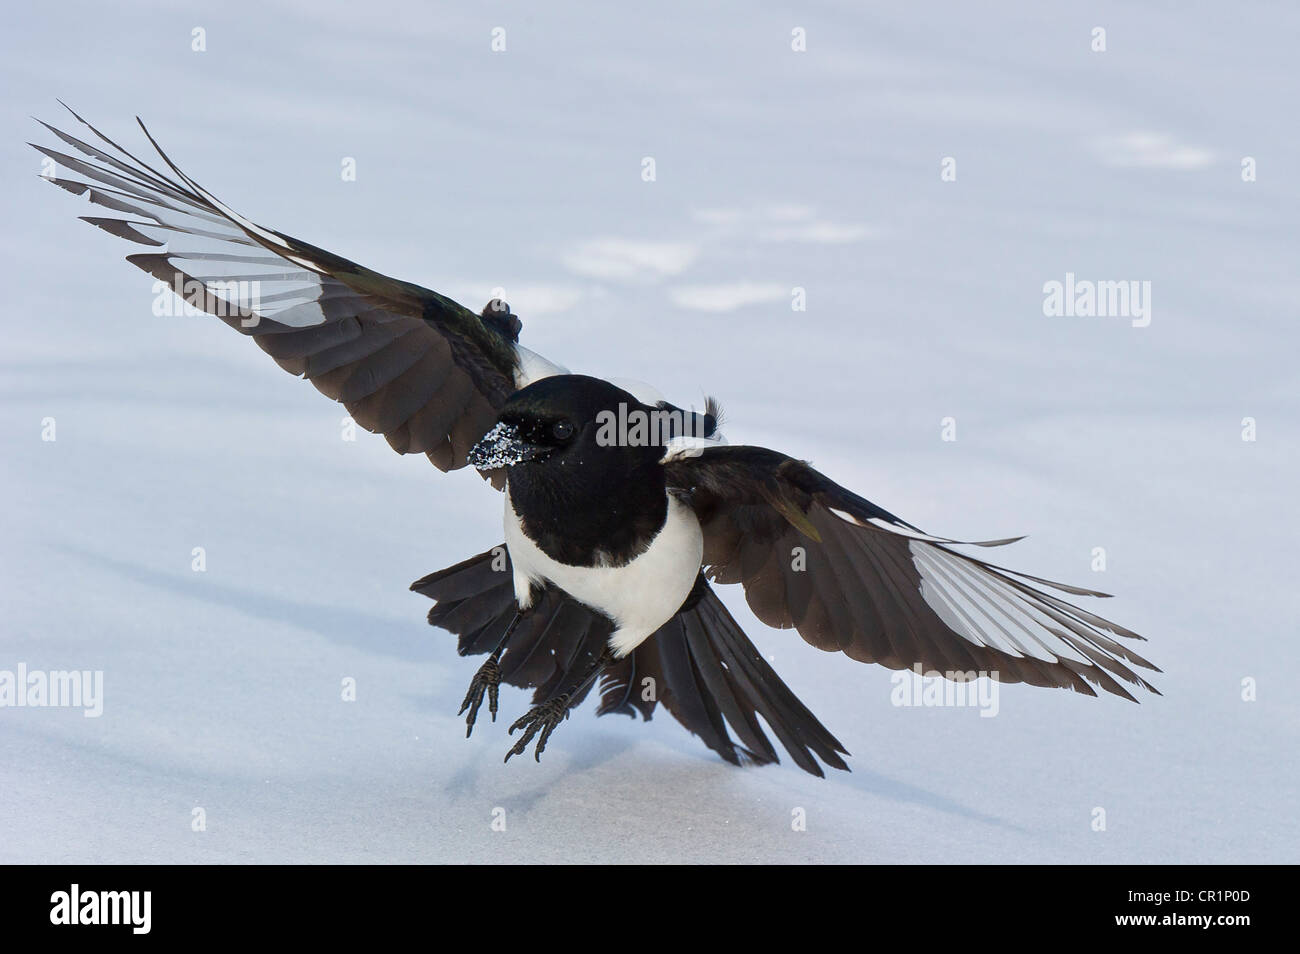 Black-billed Magpie (Pica pica) landing in snow. Stock Photo